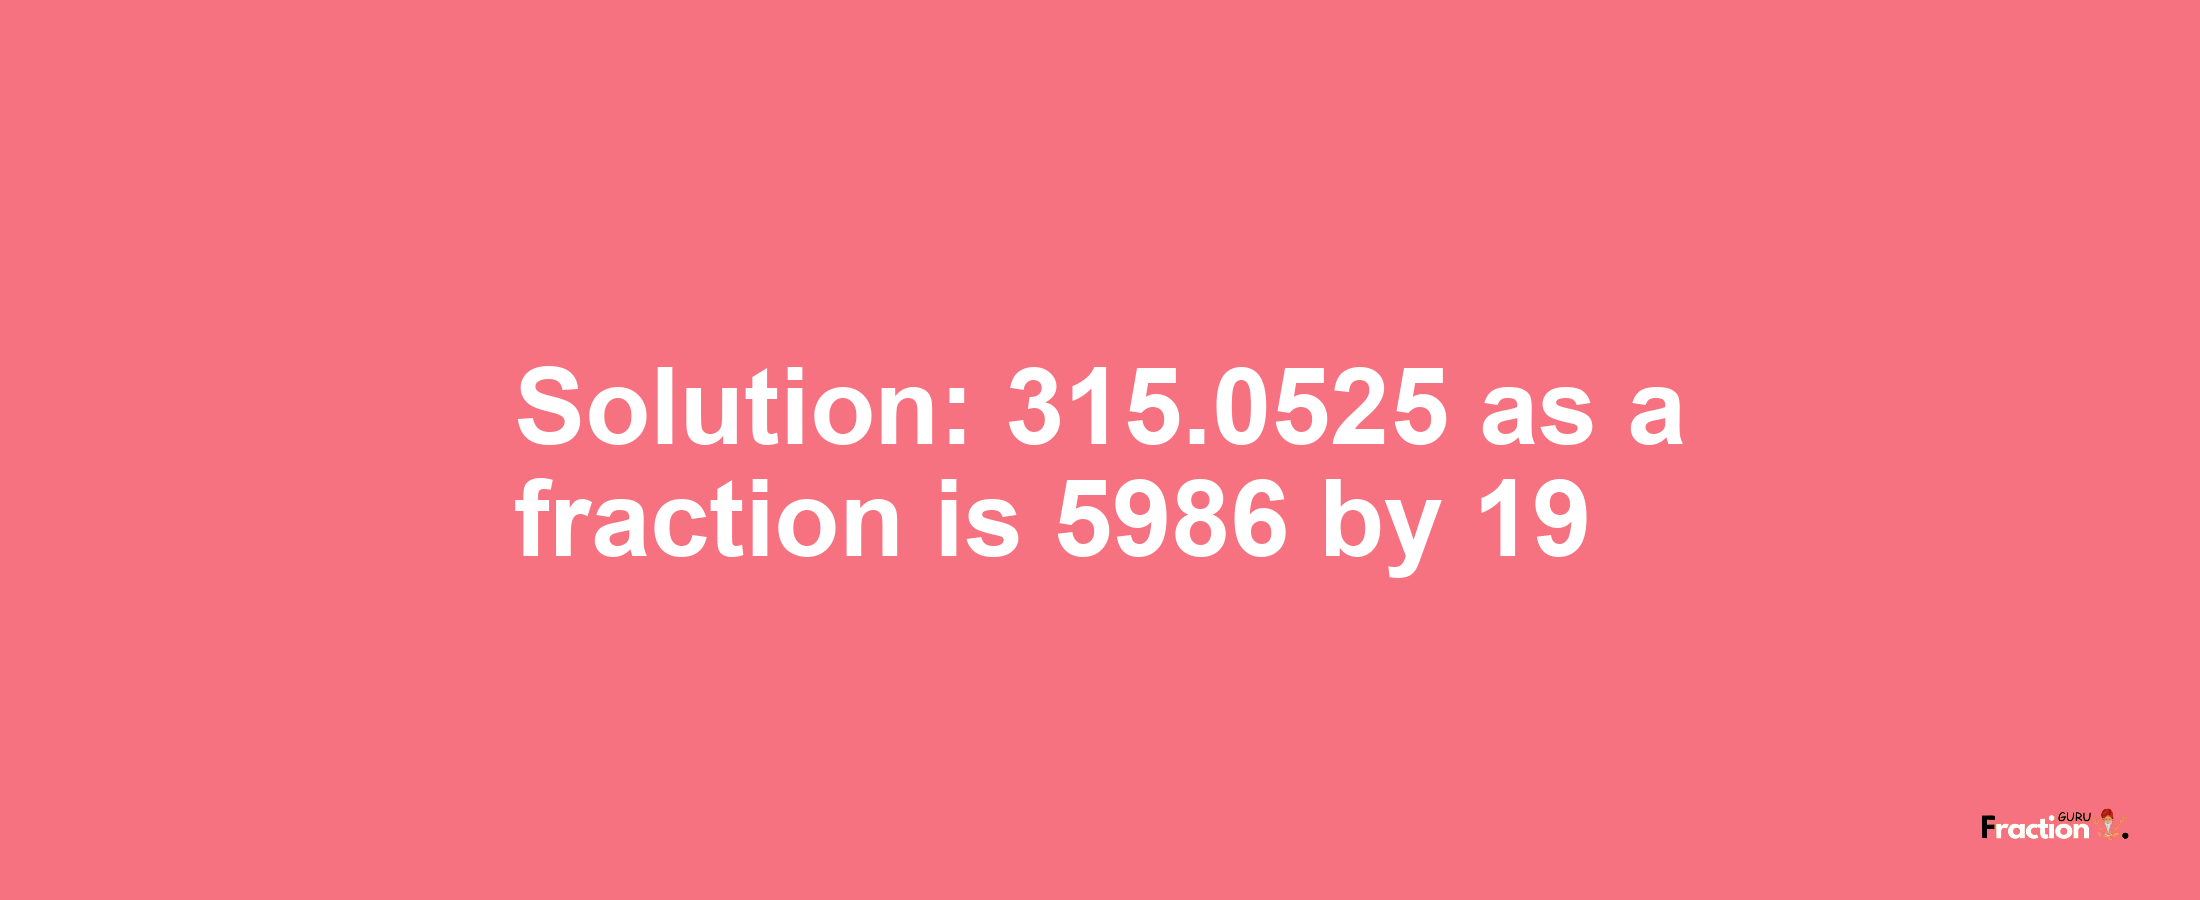 Solution:315.0525 as a fraction is 5986/19